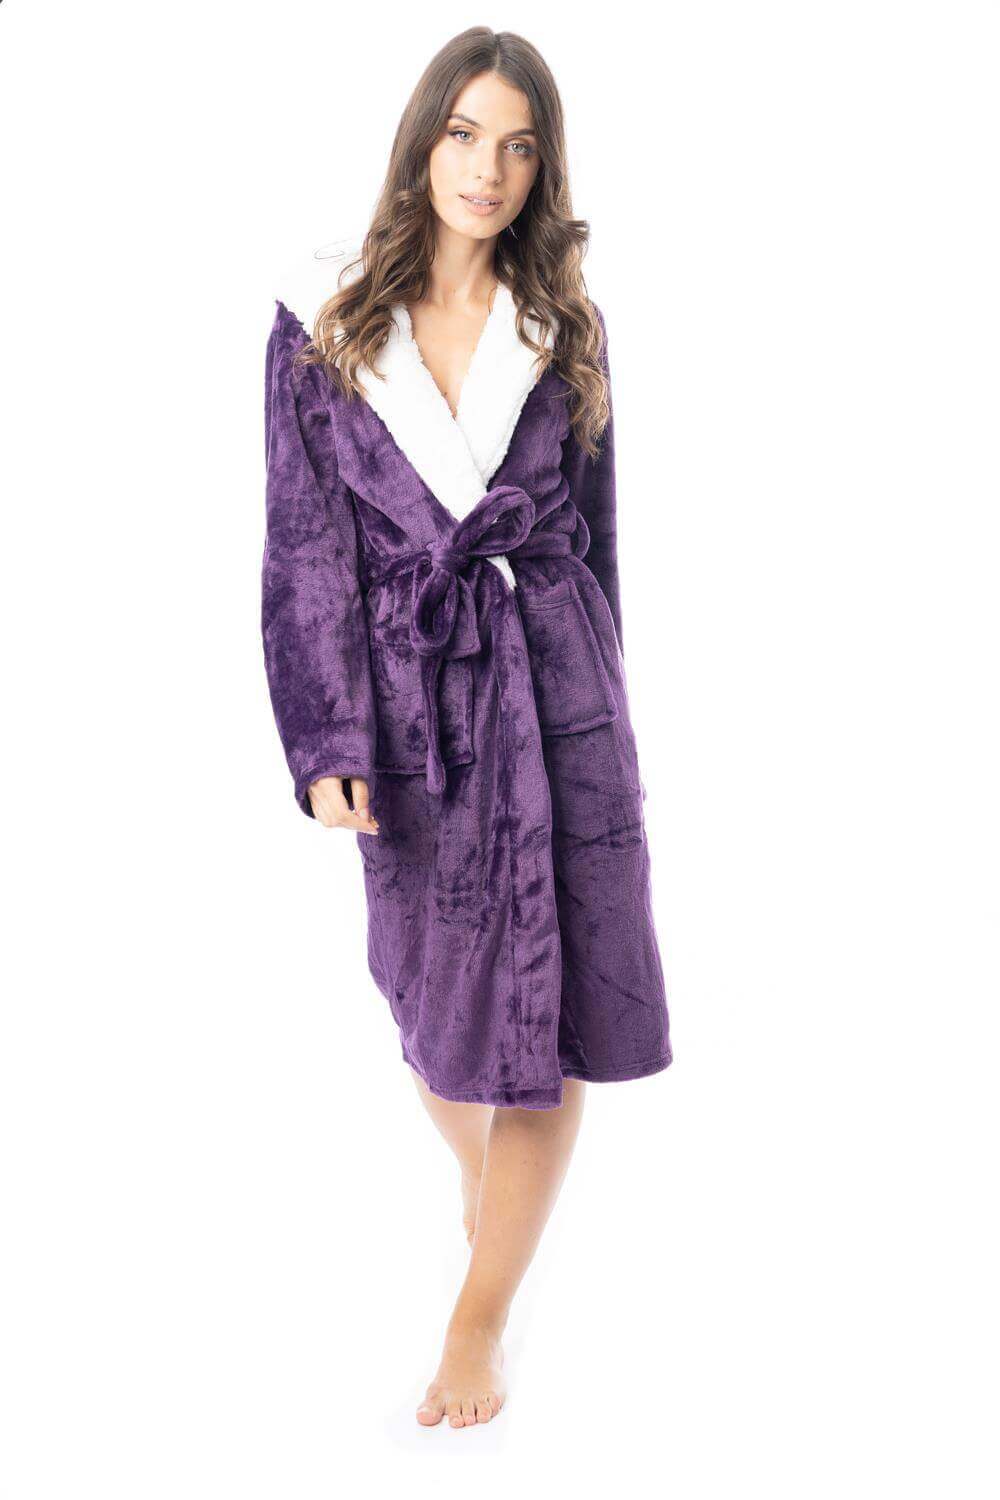 Women's Super Soft Plush Fleece Hooded Dressing Gowns, Ladies Bath Robes & Housecoats. Buy now for £20.00. A Robe by Daisy Dreamer. 12-14, 14-16, 16-18, 20-22, 8-10, black, bridesmaid, brown, charcoal, daisy dreamer, fleece, fluffy, girls, gold, gowns, gy